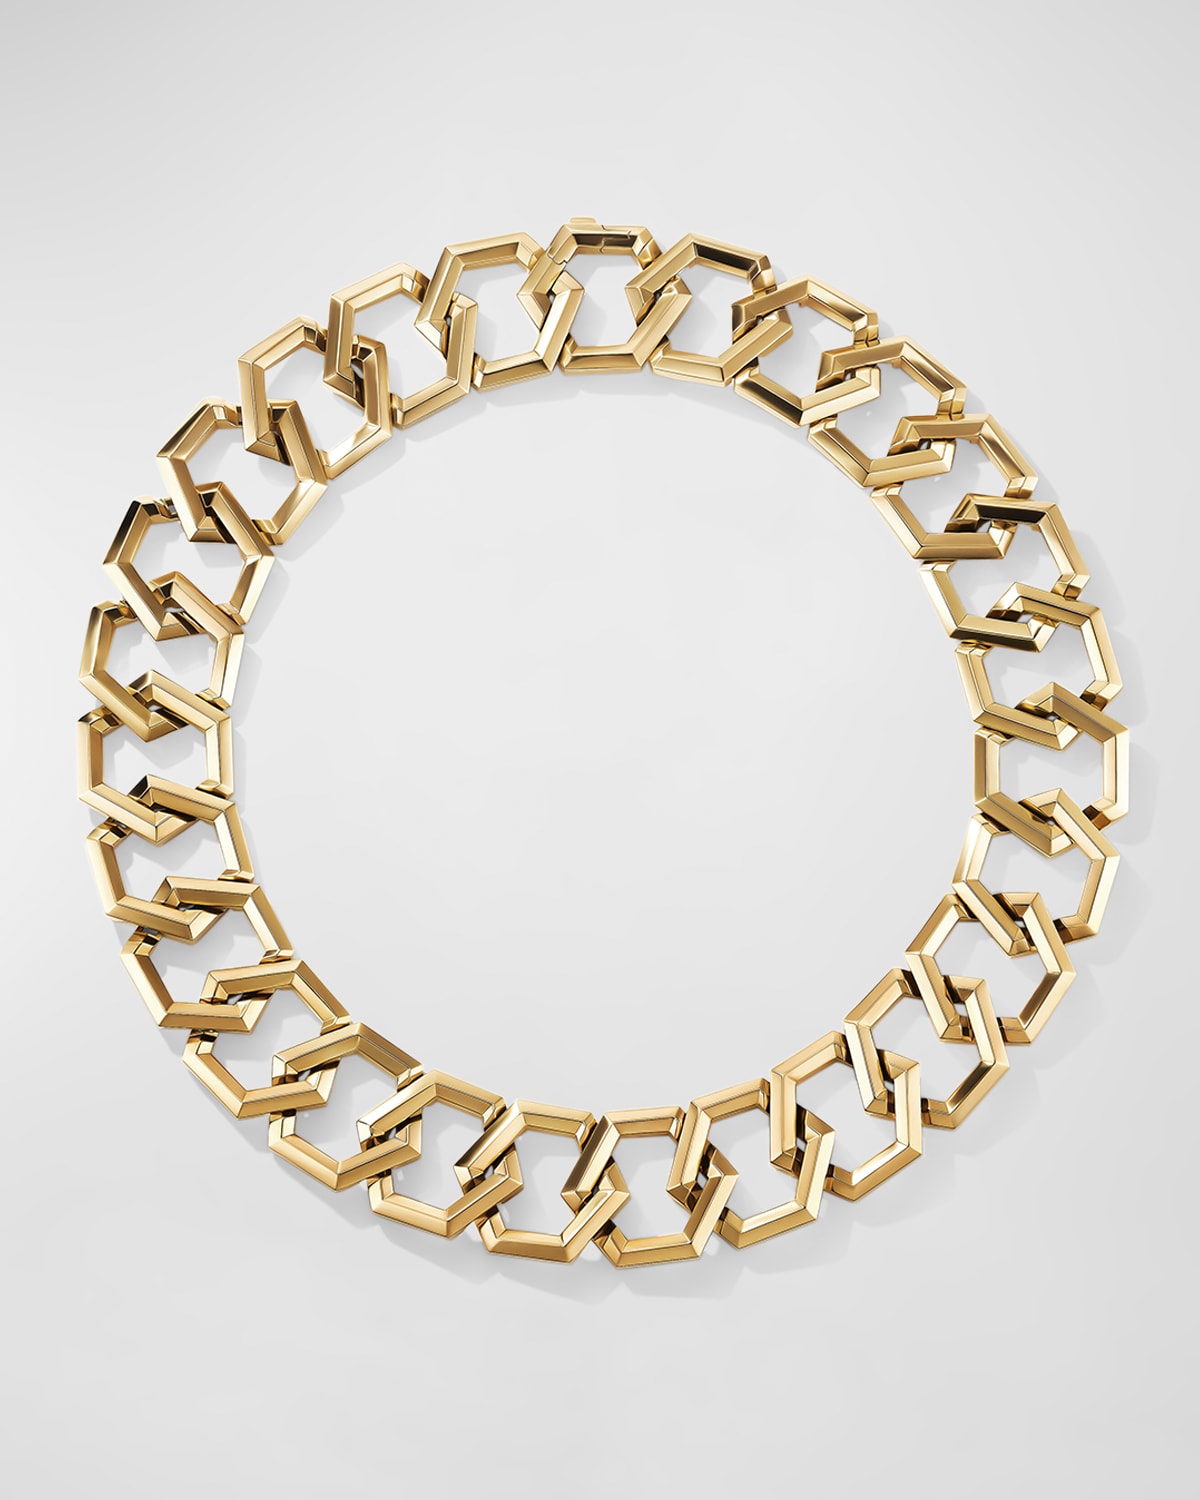 Madison Thin Chain Link Necklace in 18K Gold, 3mm, 36"L